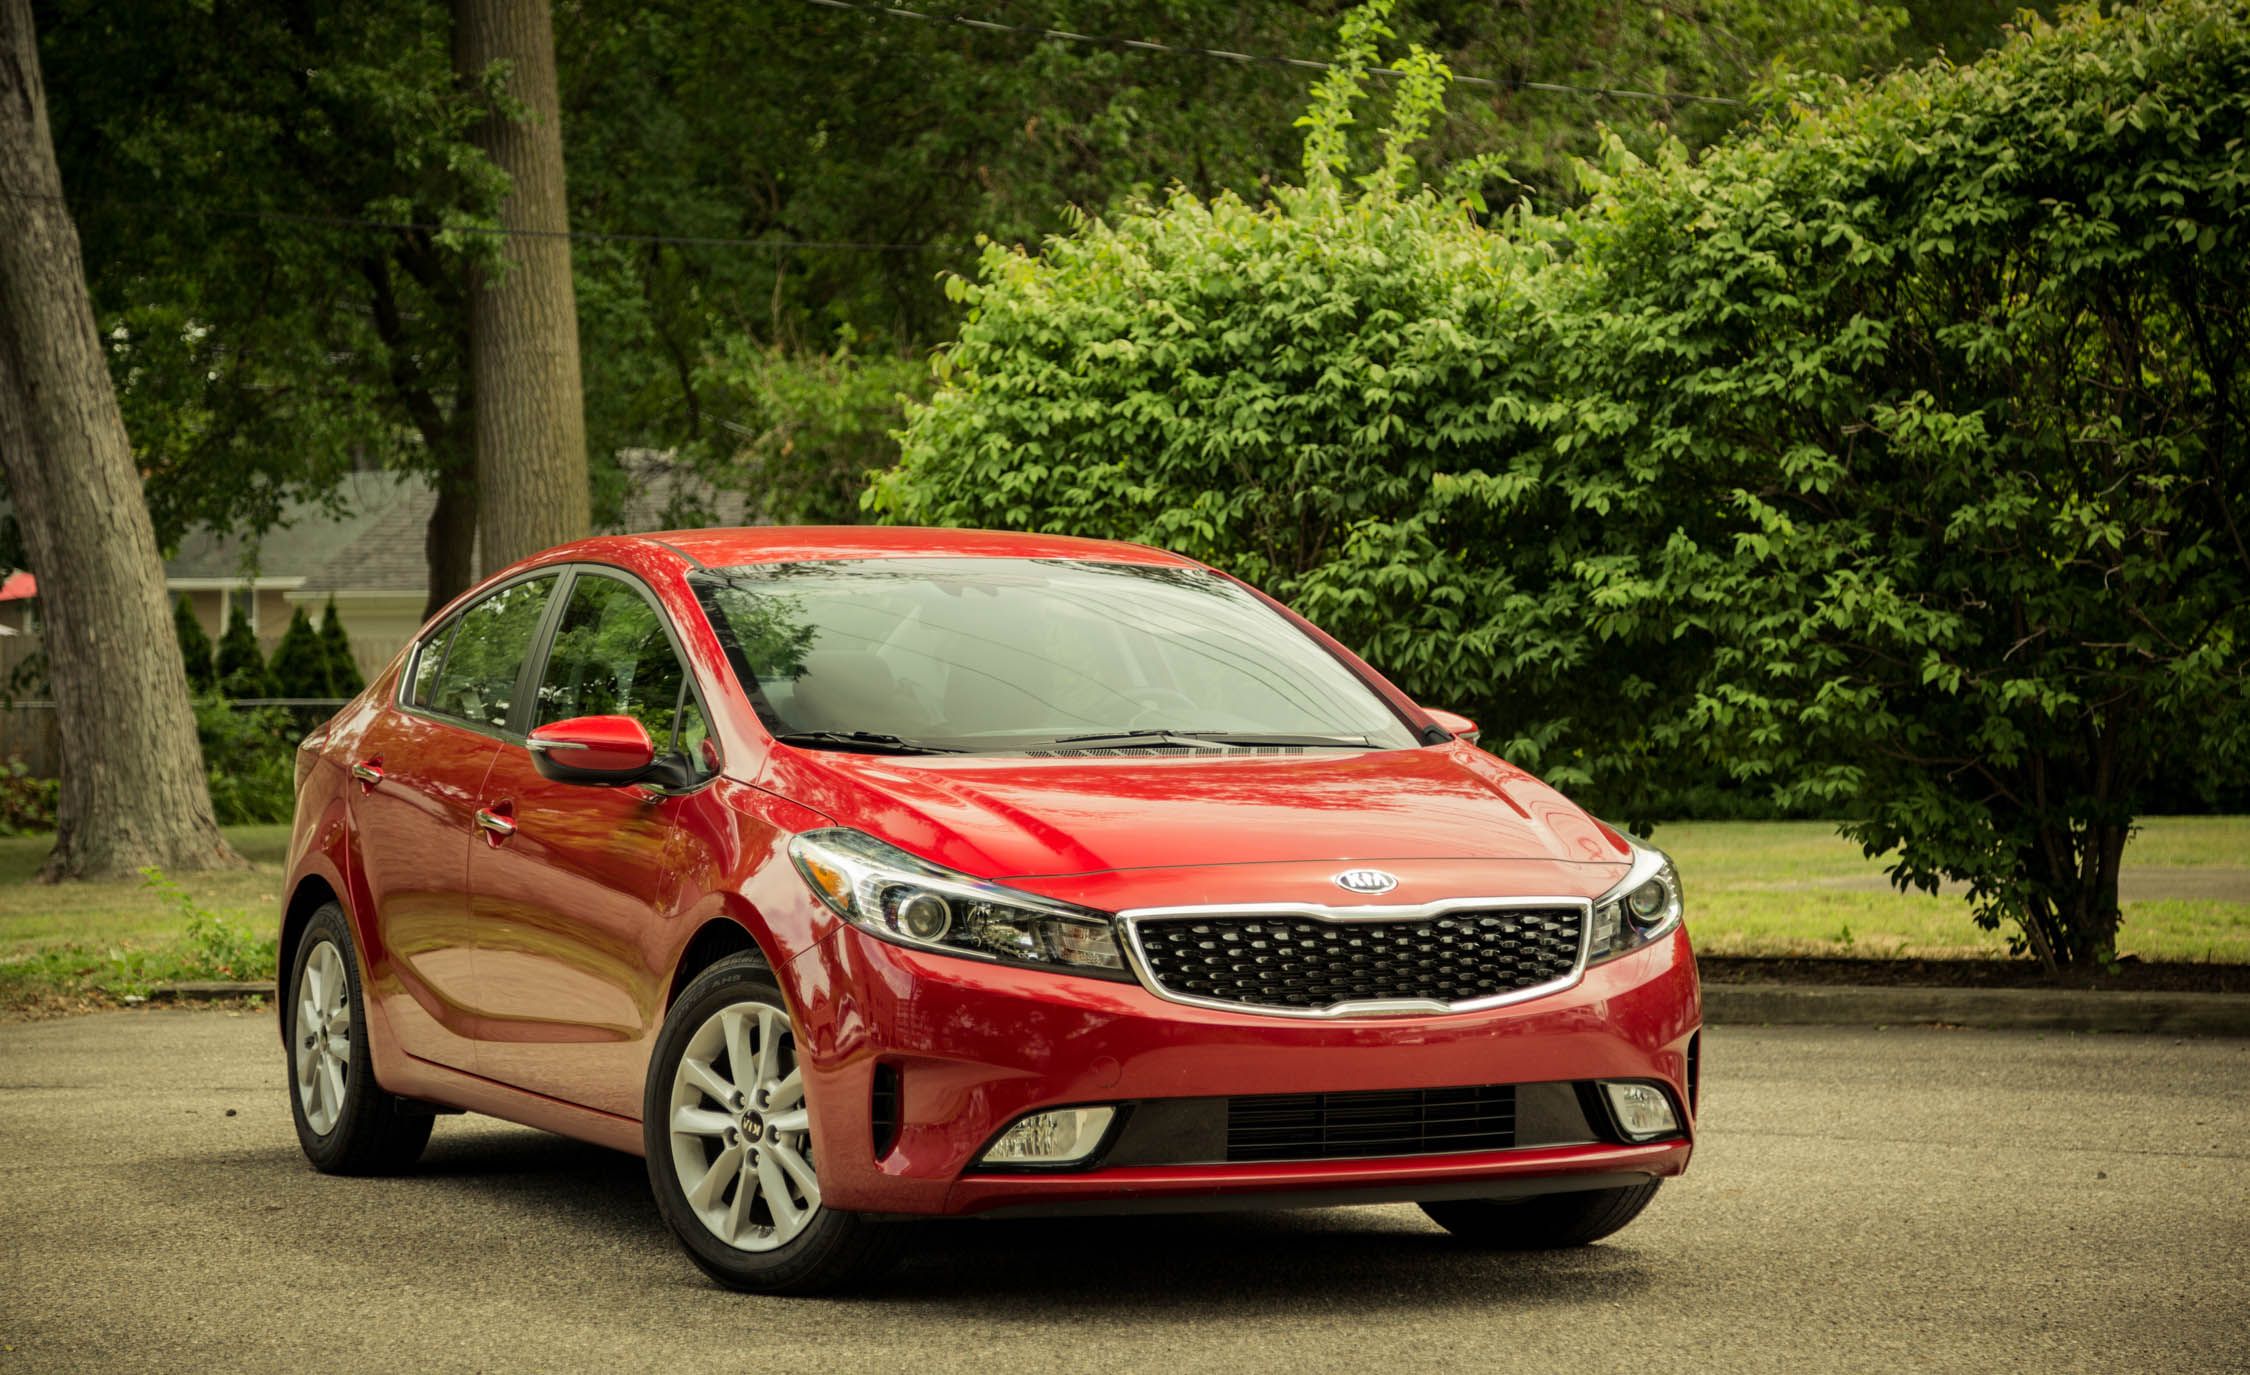 2017 Kia Forte / Forte5 | UVO3 Infotainment Review | Car and Driver